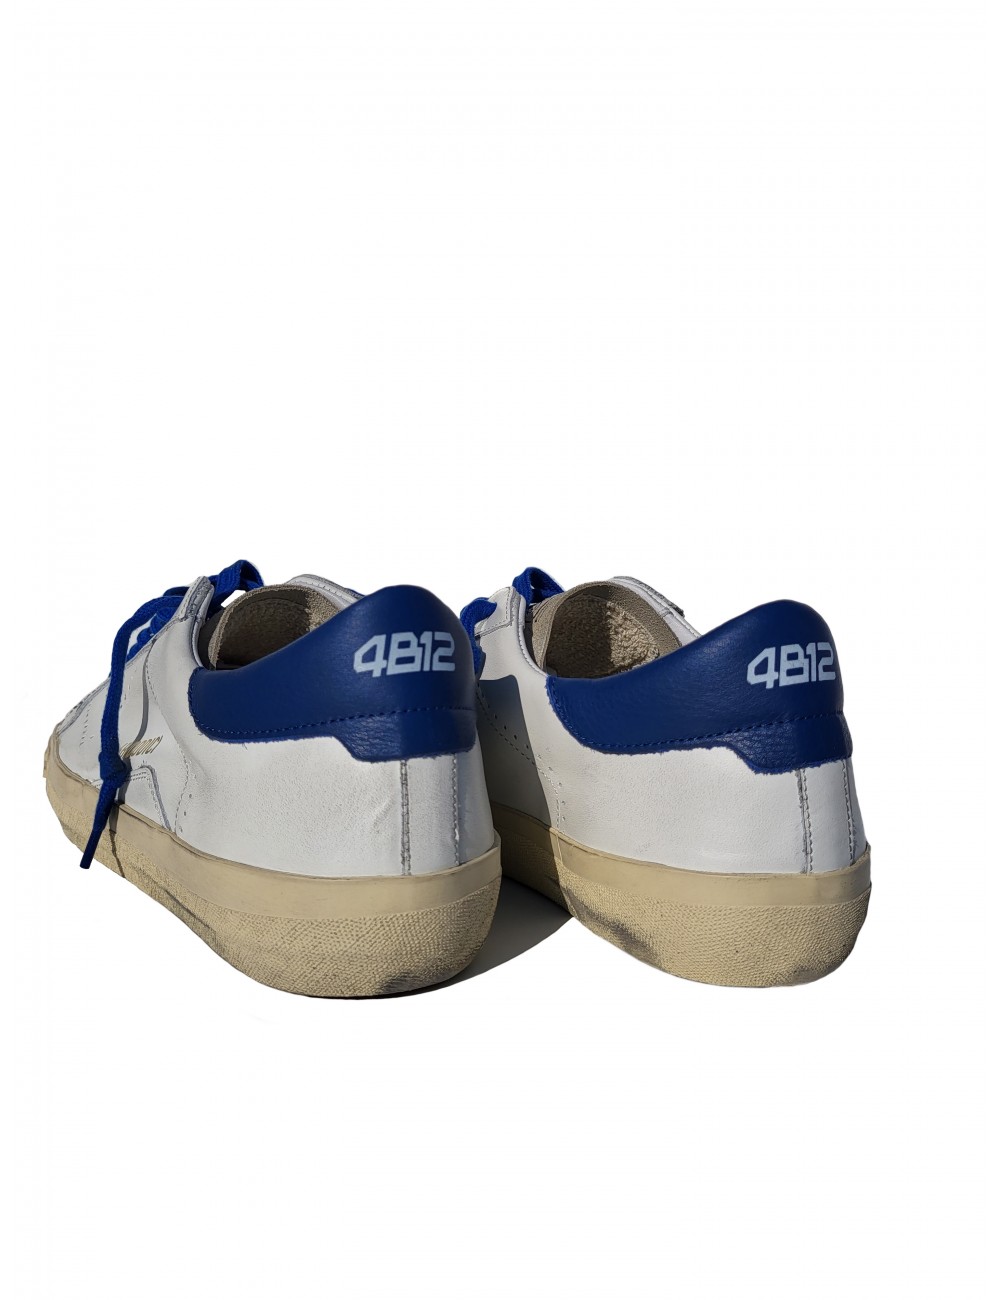 Men's sneakers in white and blue calf leather, distressed and aged  4B12-ARTHUR Shoes